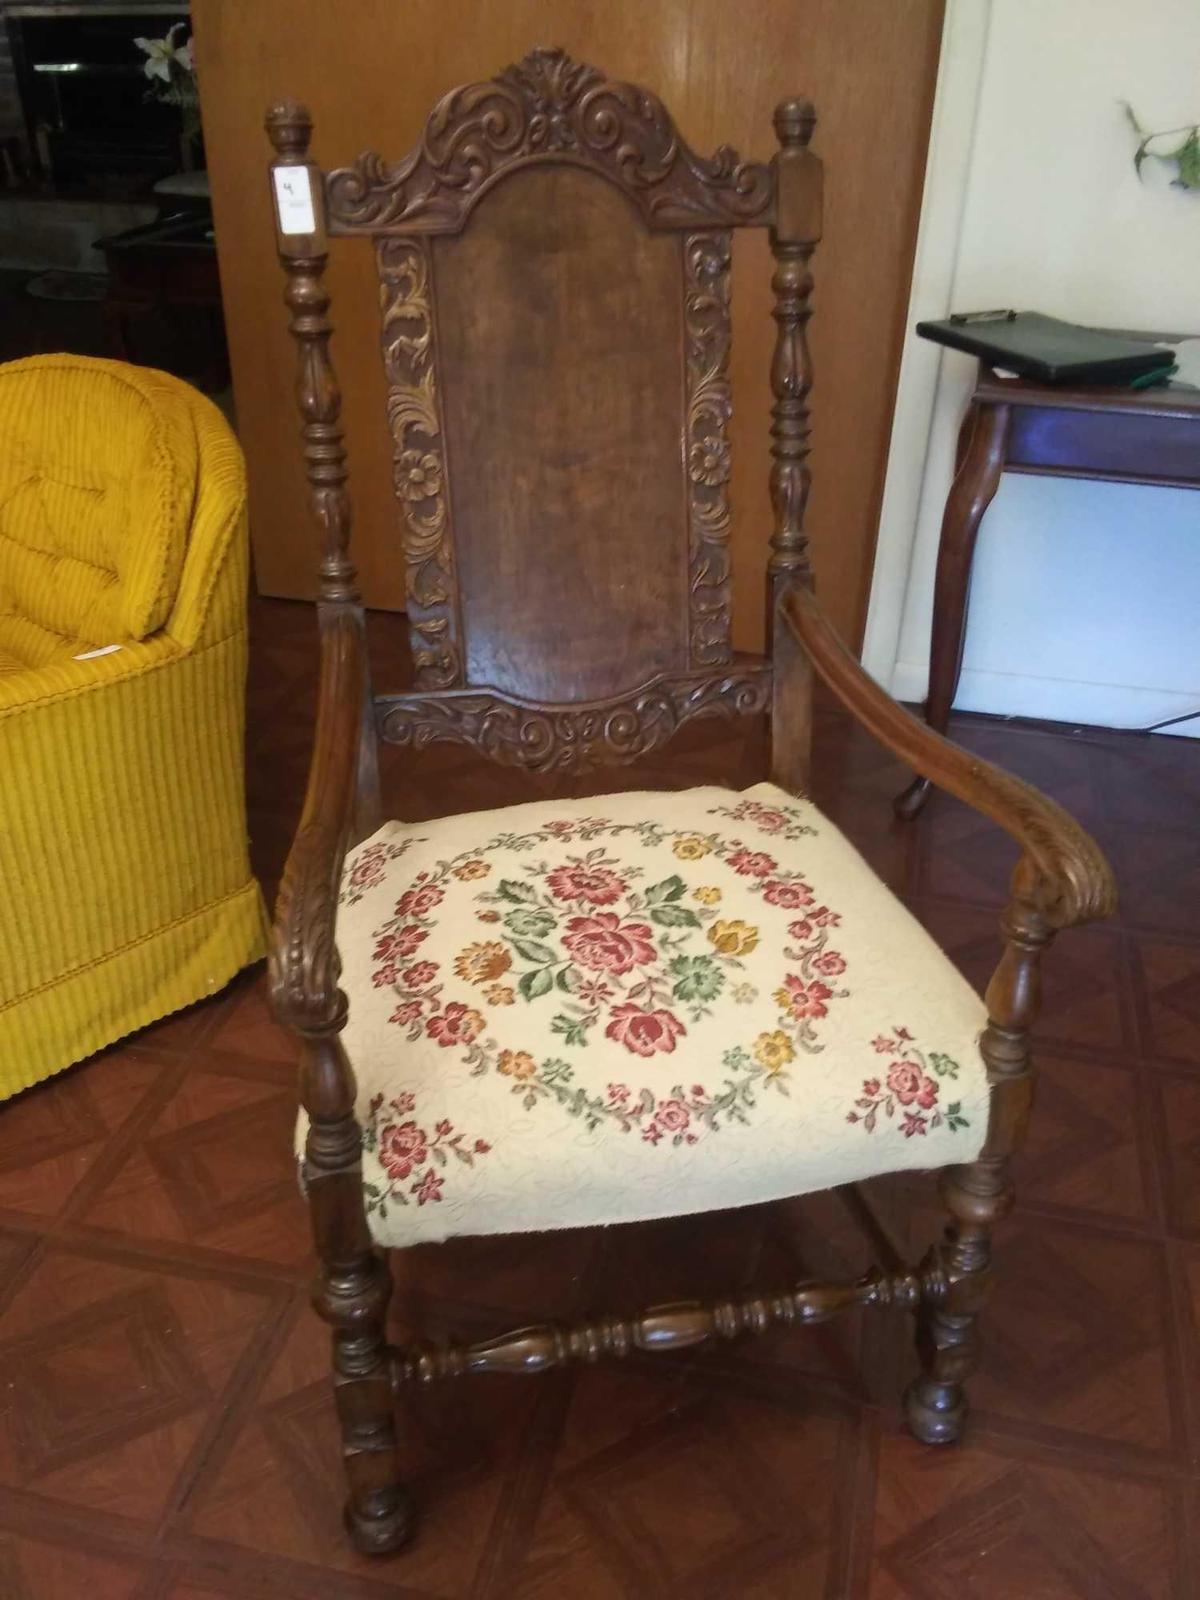 Vintage Ornately Carved Wooden Throne Sitting Chair